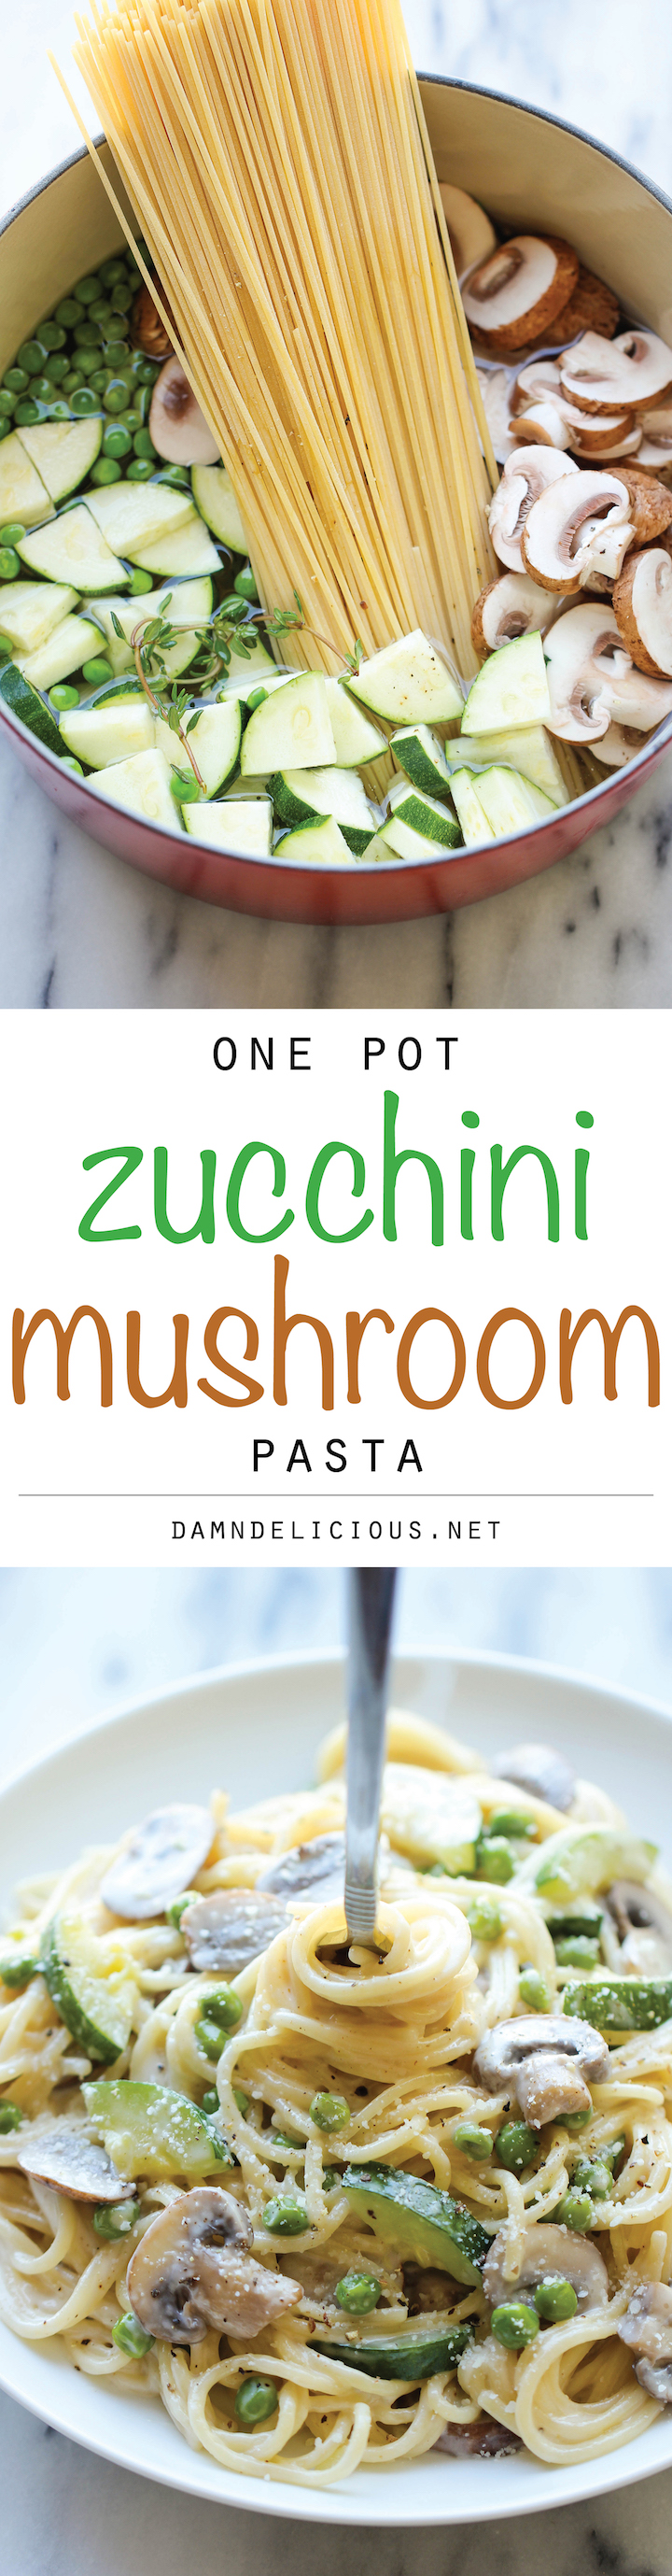 One Pot Zucchini Mushroom Pasta - A creamy, hearty pasta dish that you can make in just 20 min. Even the pasta gets cooked in the pot!